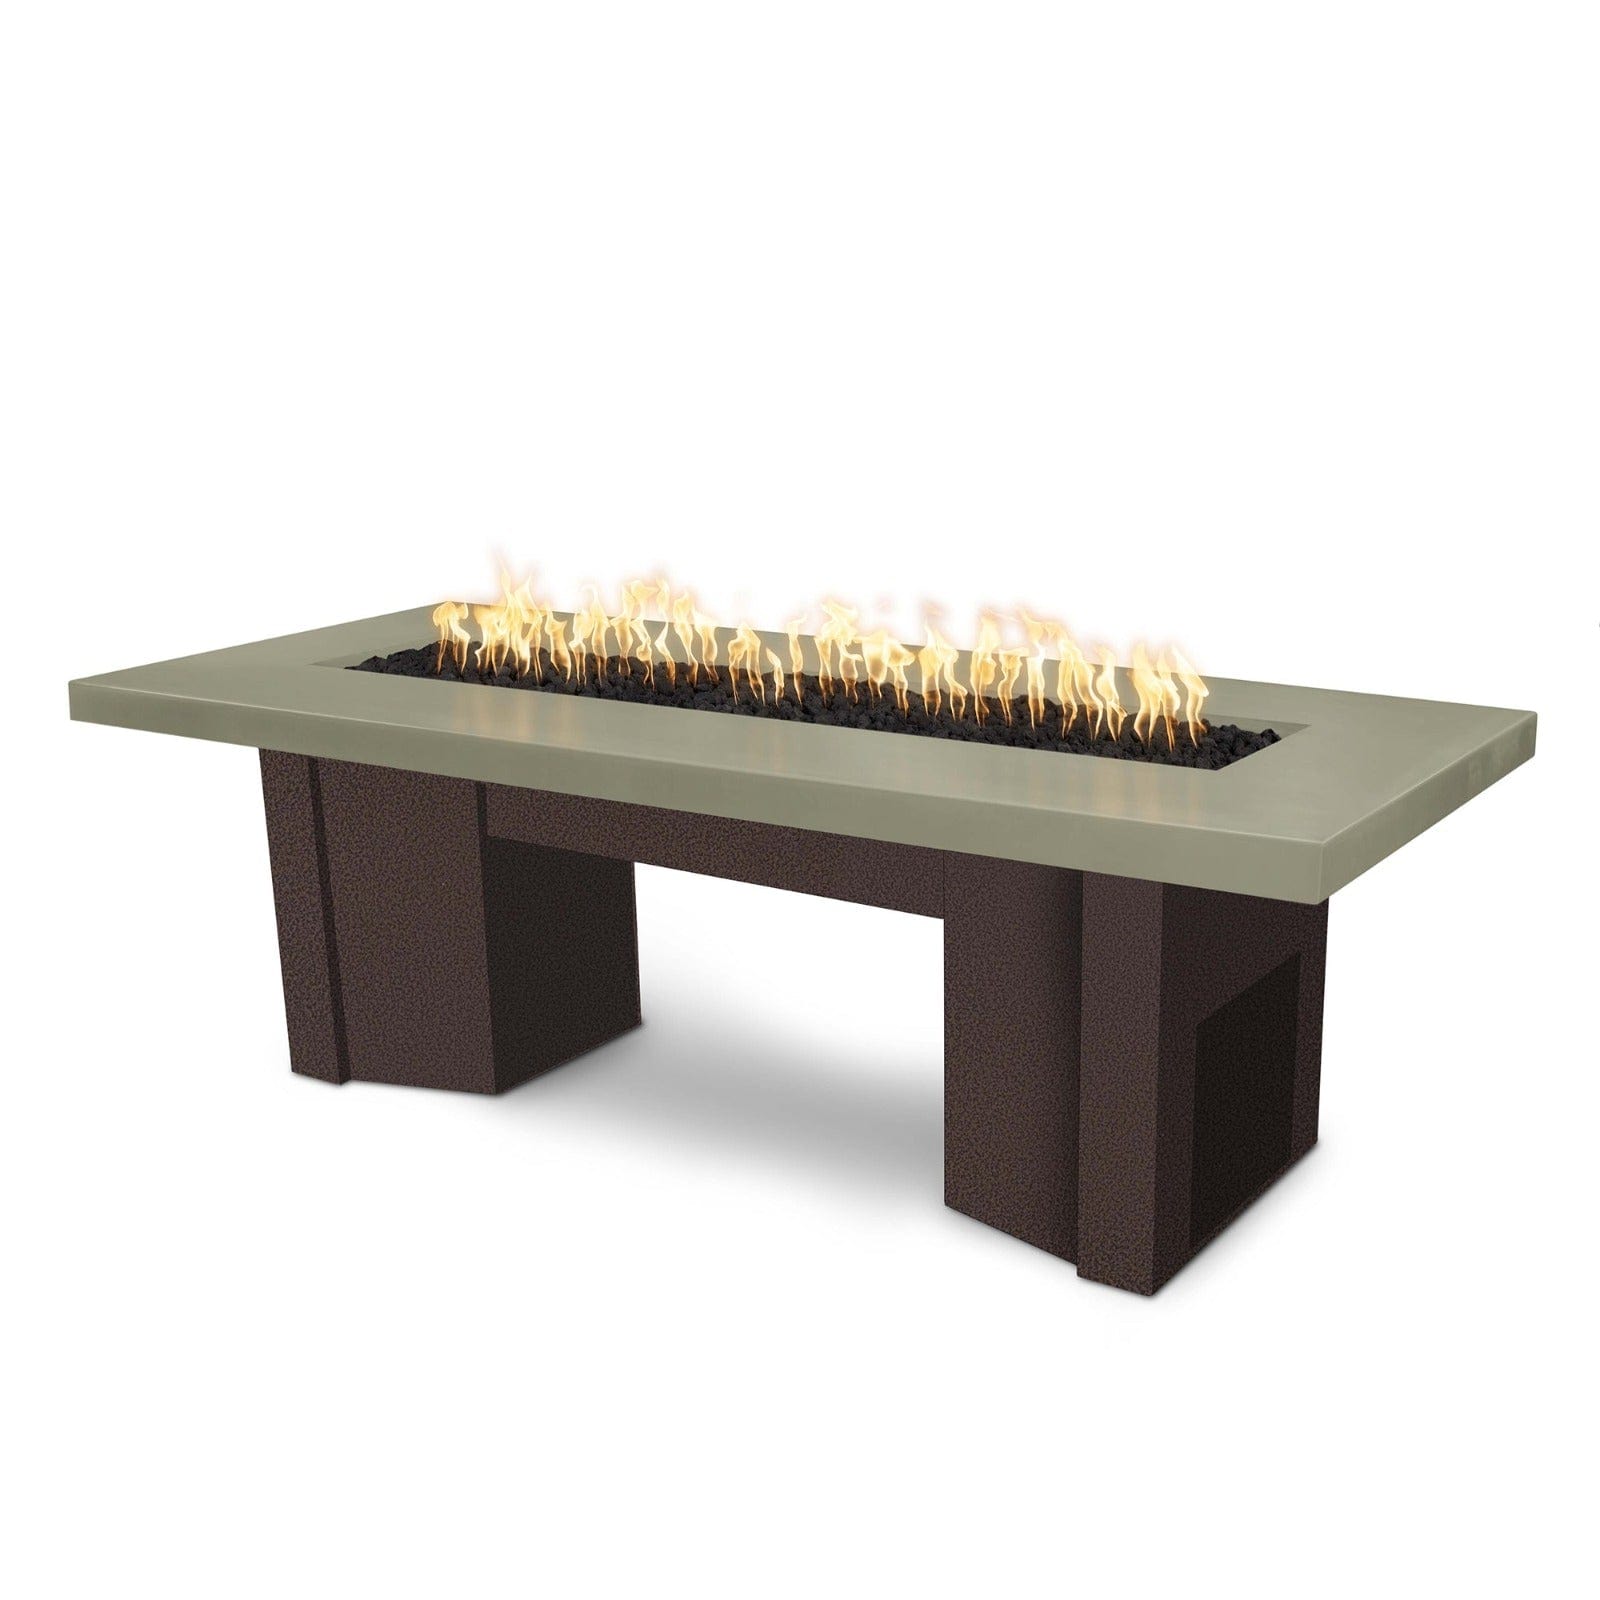 The Outdoor Plus Fire Features Ash (-ASH) / Copper Vein Powder Coated Steel (-CPV) The Outdoor Plus 60" Alameda Fire Table Smooth Concrete in Liquid Propane - Match Lit / OPT-ALMGFRC60-LP